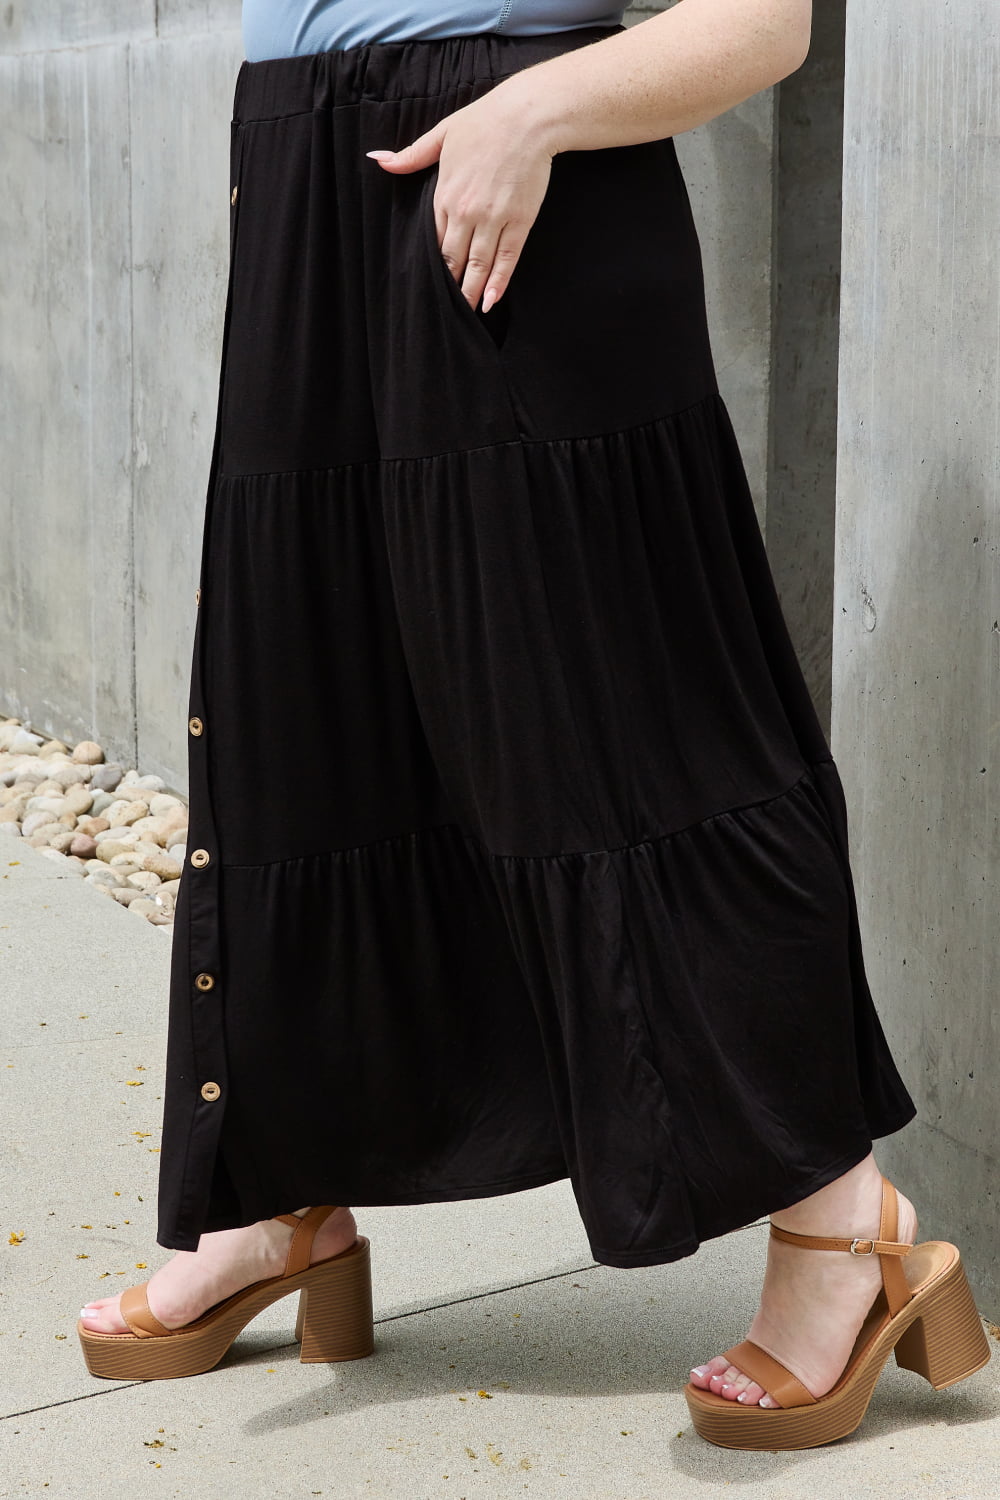 Pockets - Missionary modest maxi skirt from Nauvoo Supply Co